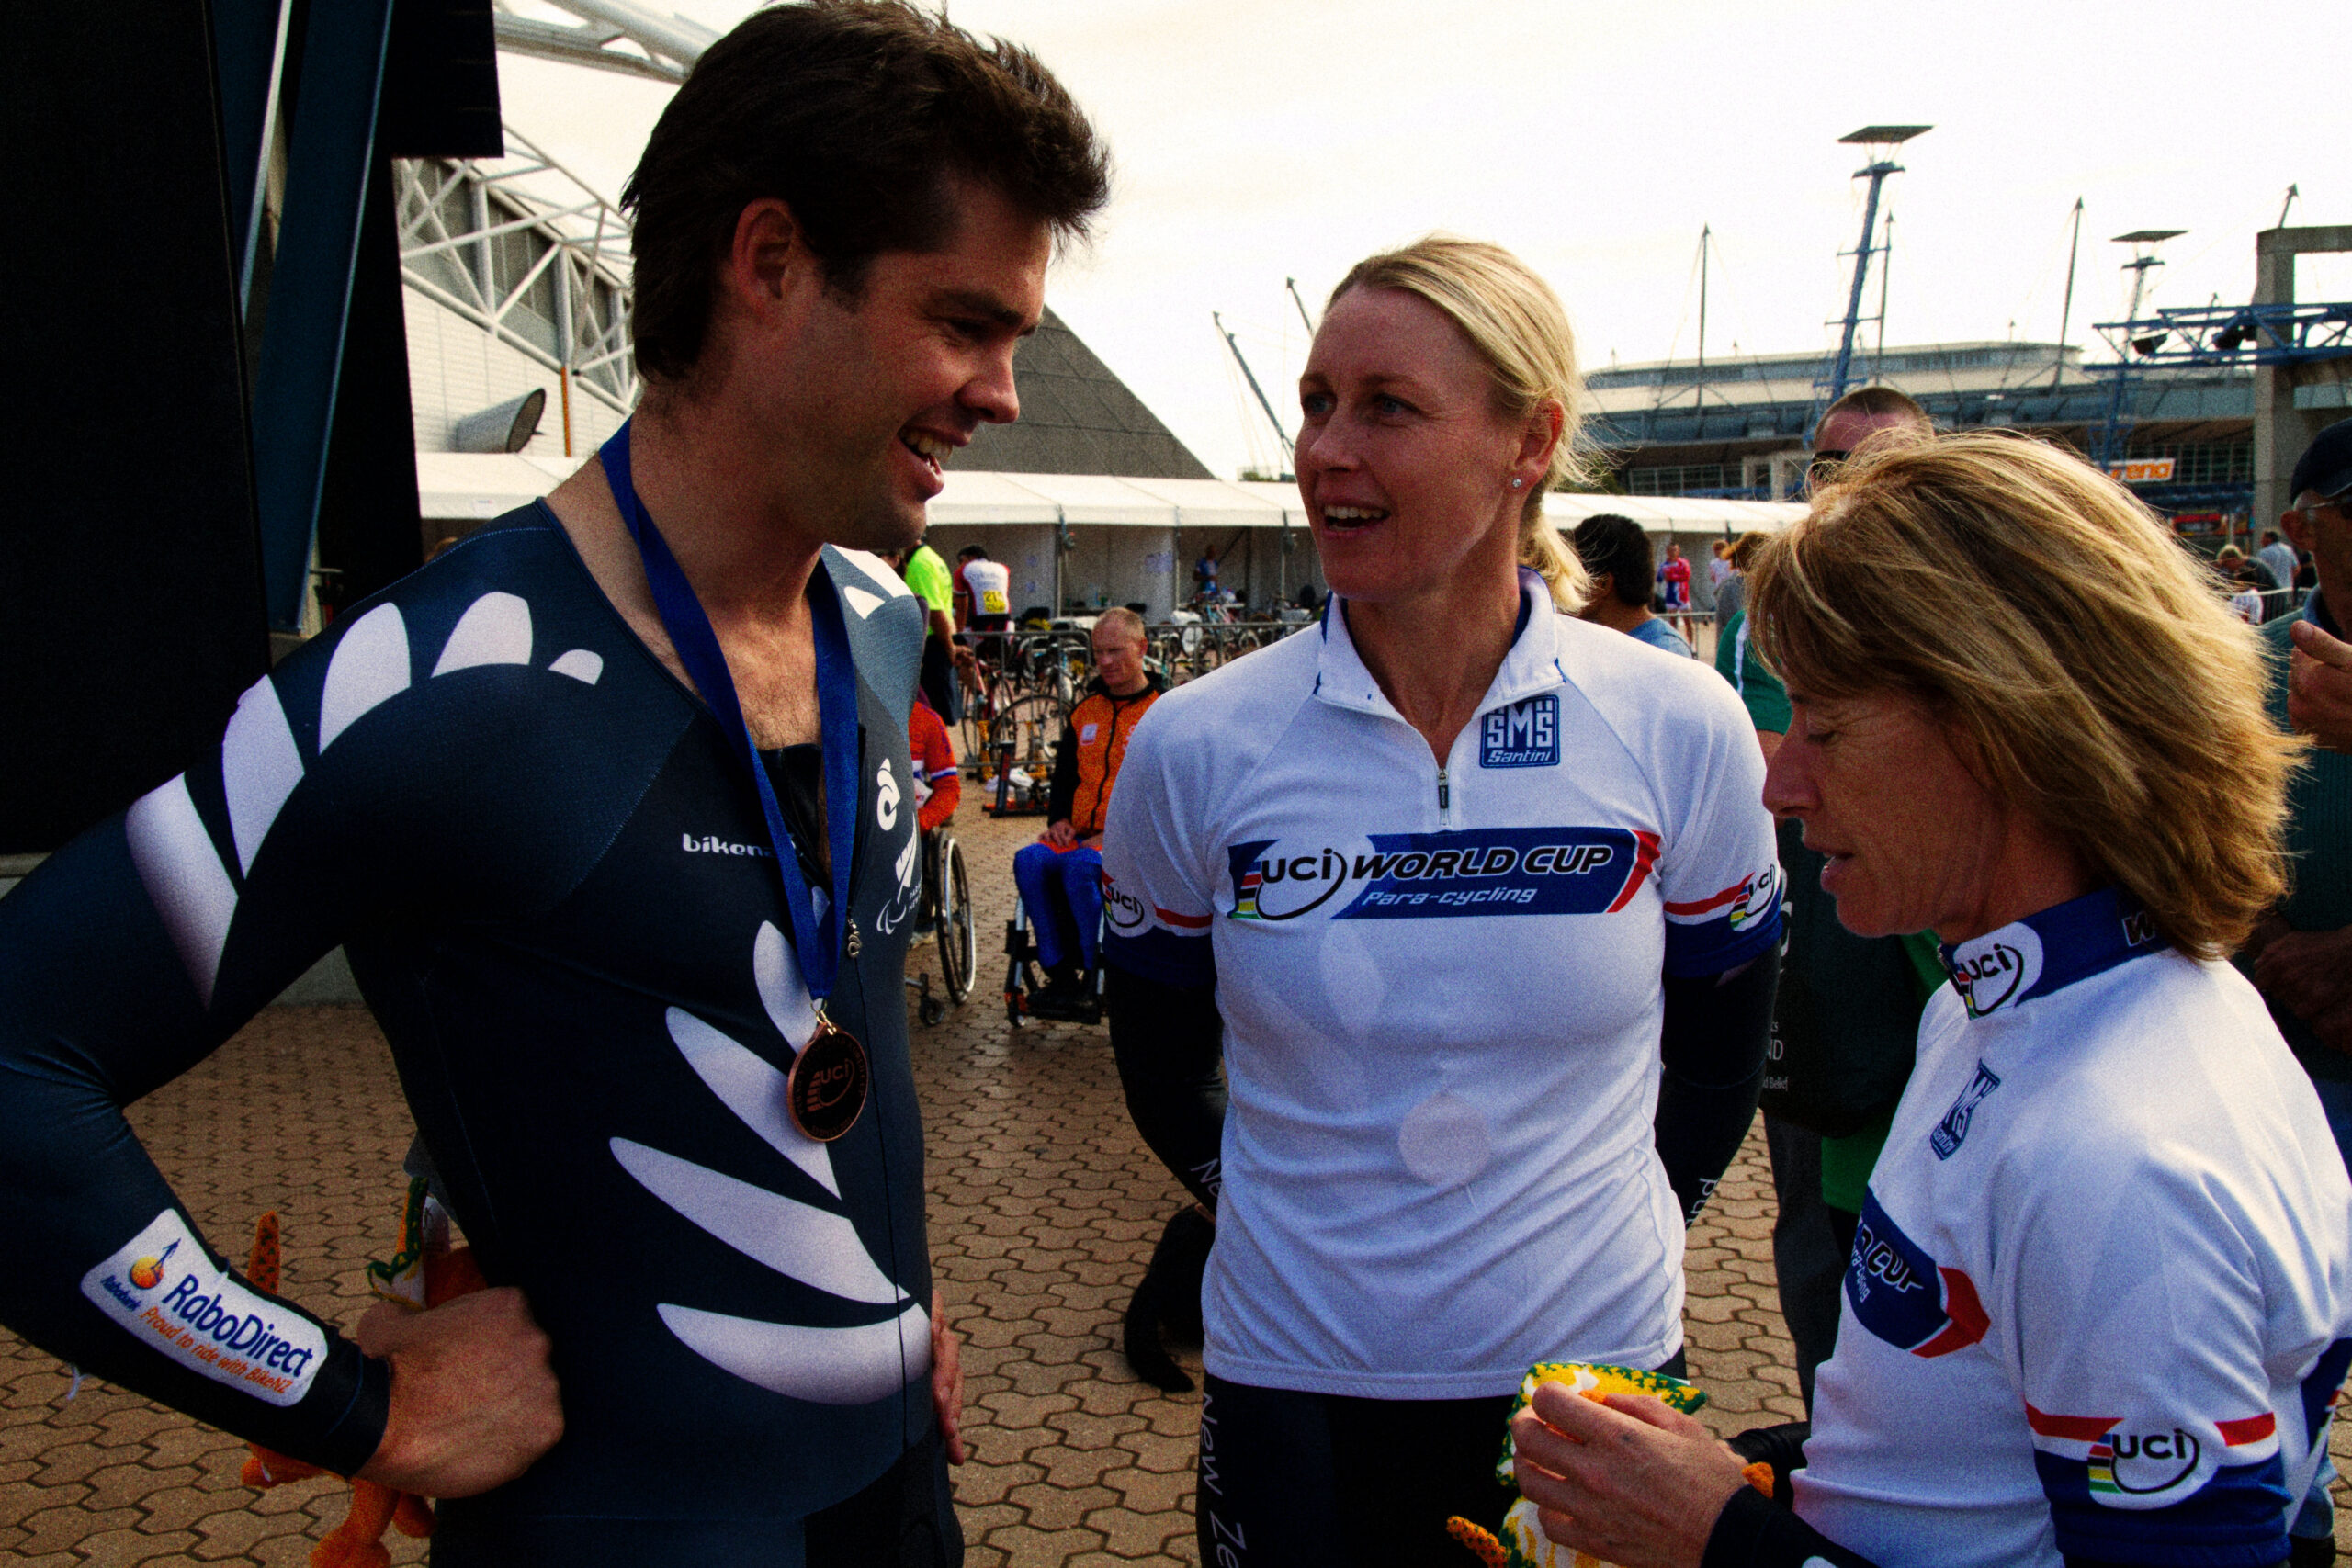 dark haired athlete talking to people after a race wearing cycling gear and a medal